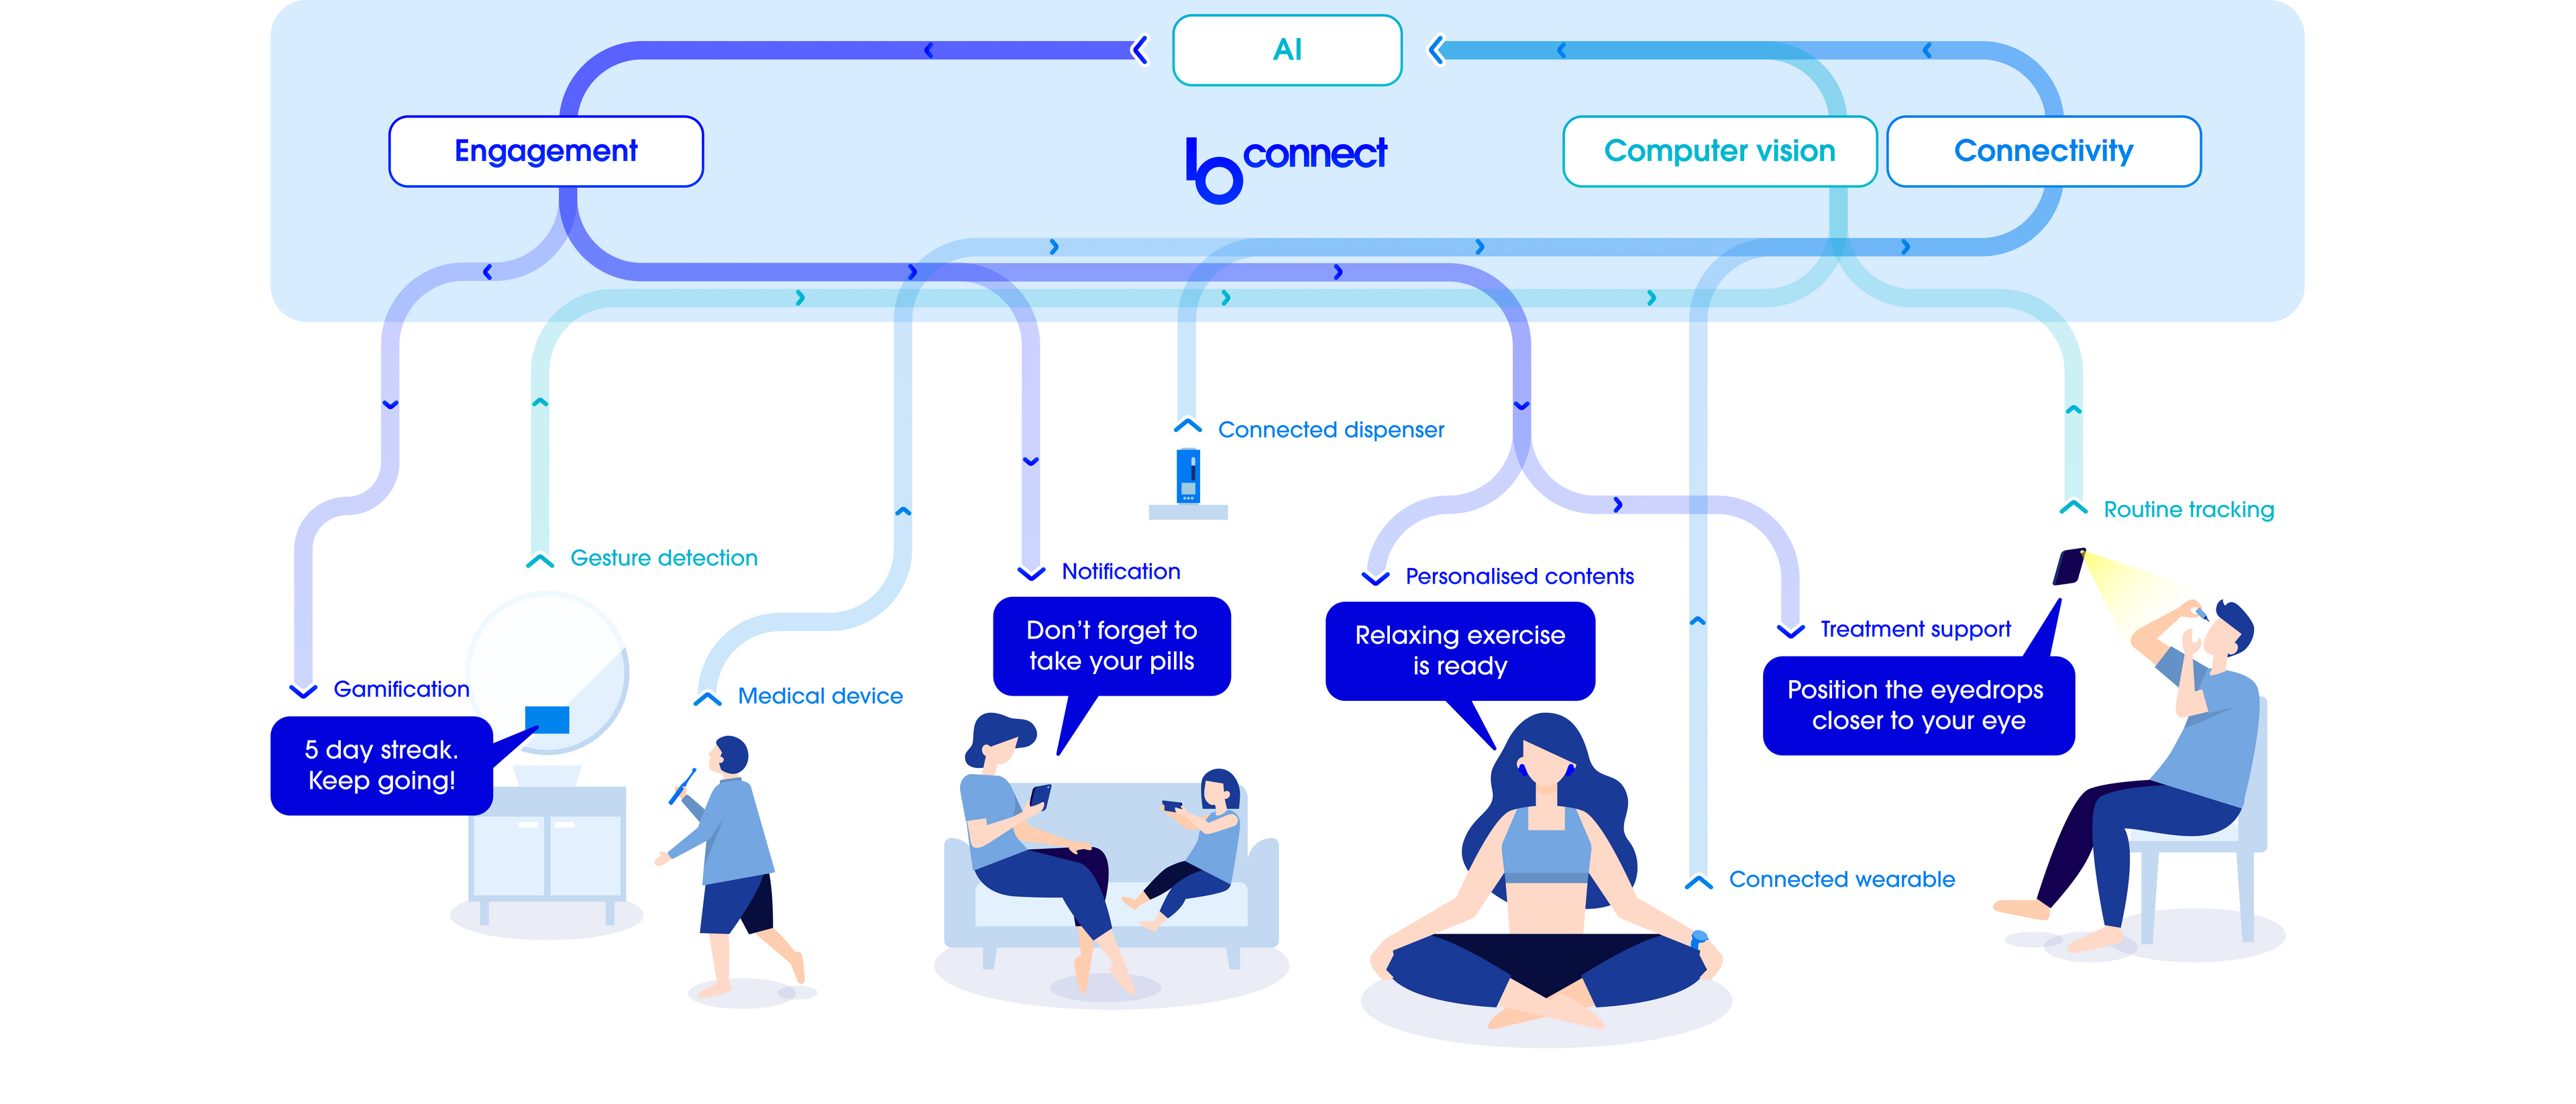 BConnect platform featuring AI, Engagement, Computer vision and Connectivity